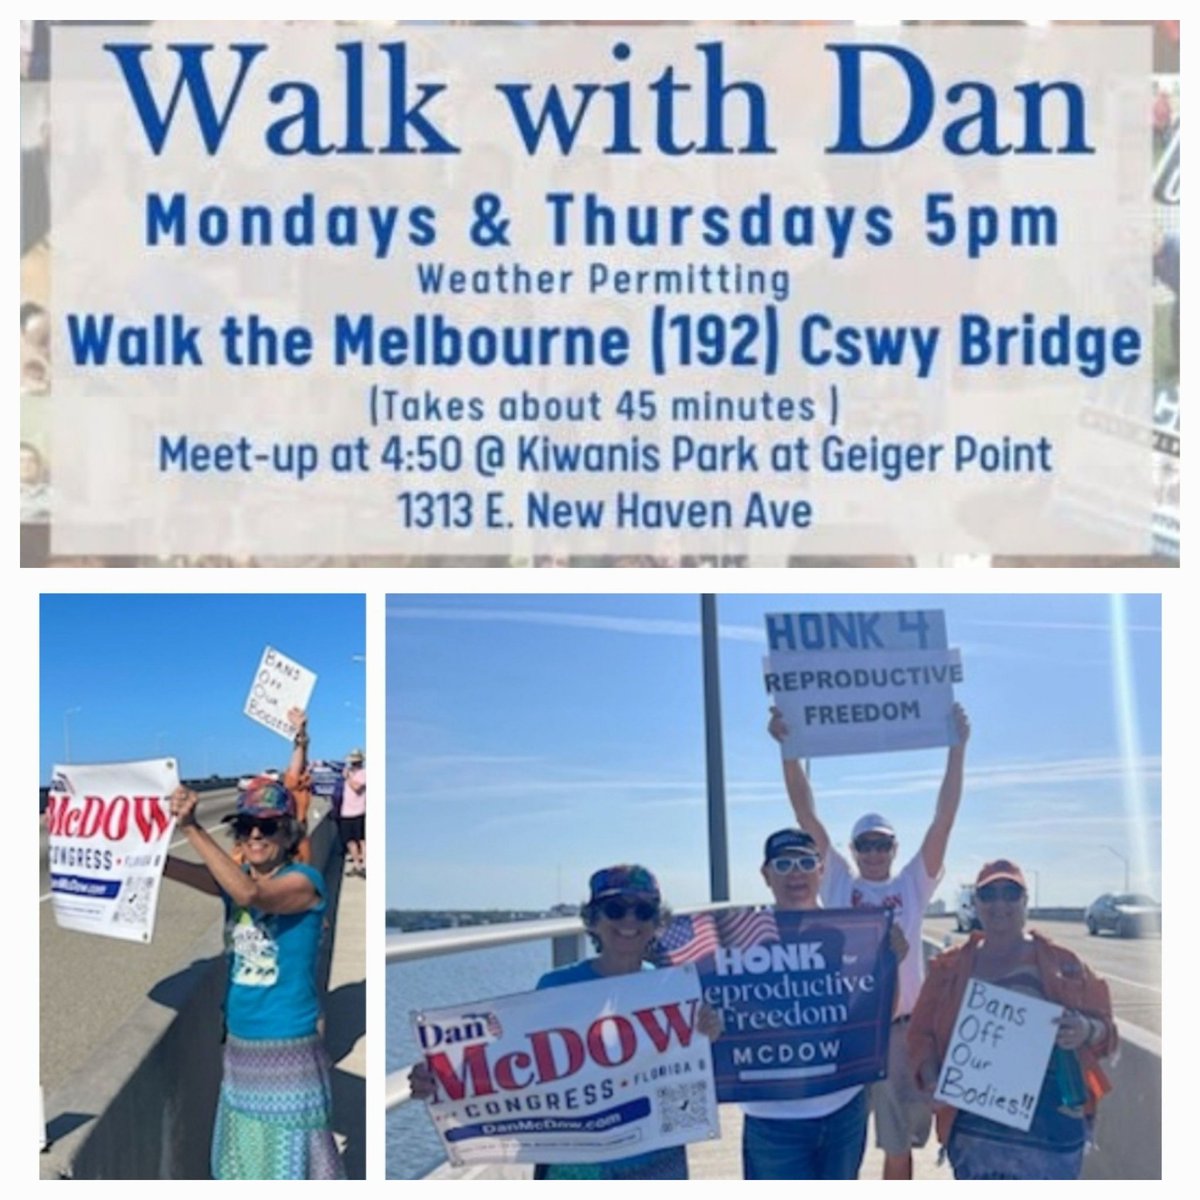 #WalkWithDan this afternoon at 5.

Let's make certain that drivers know, #ReproductiveFreedom is on the line this #RoeVember